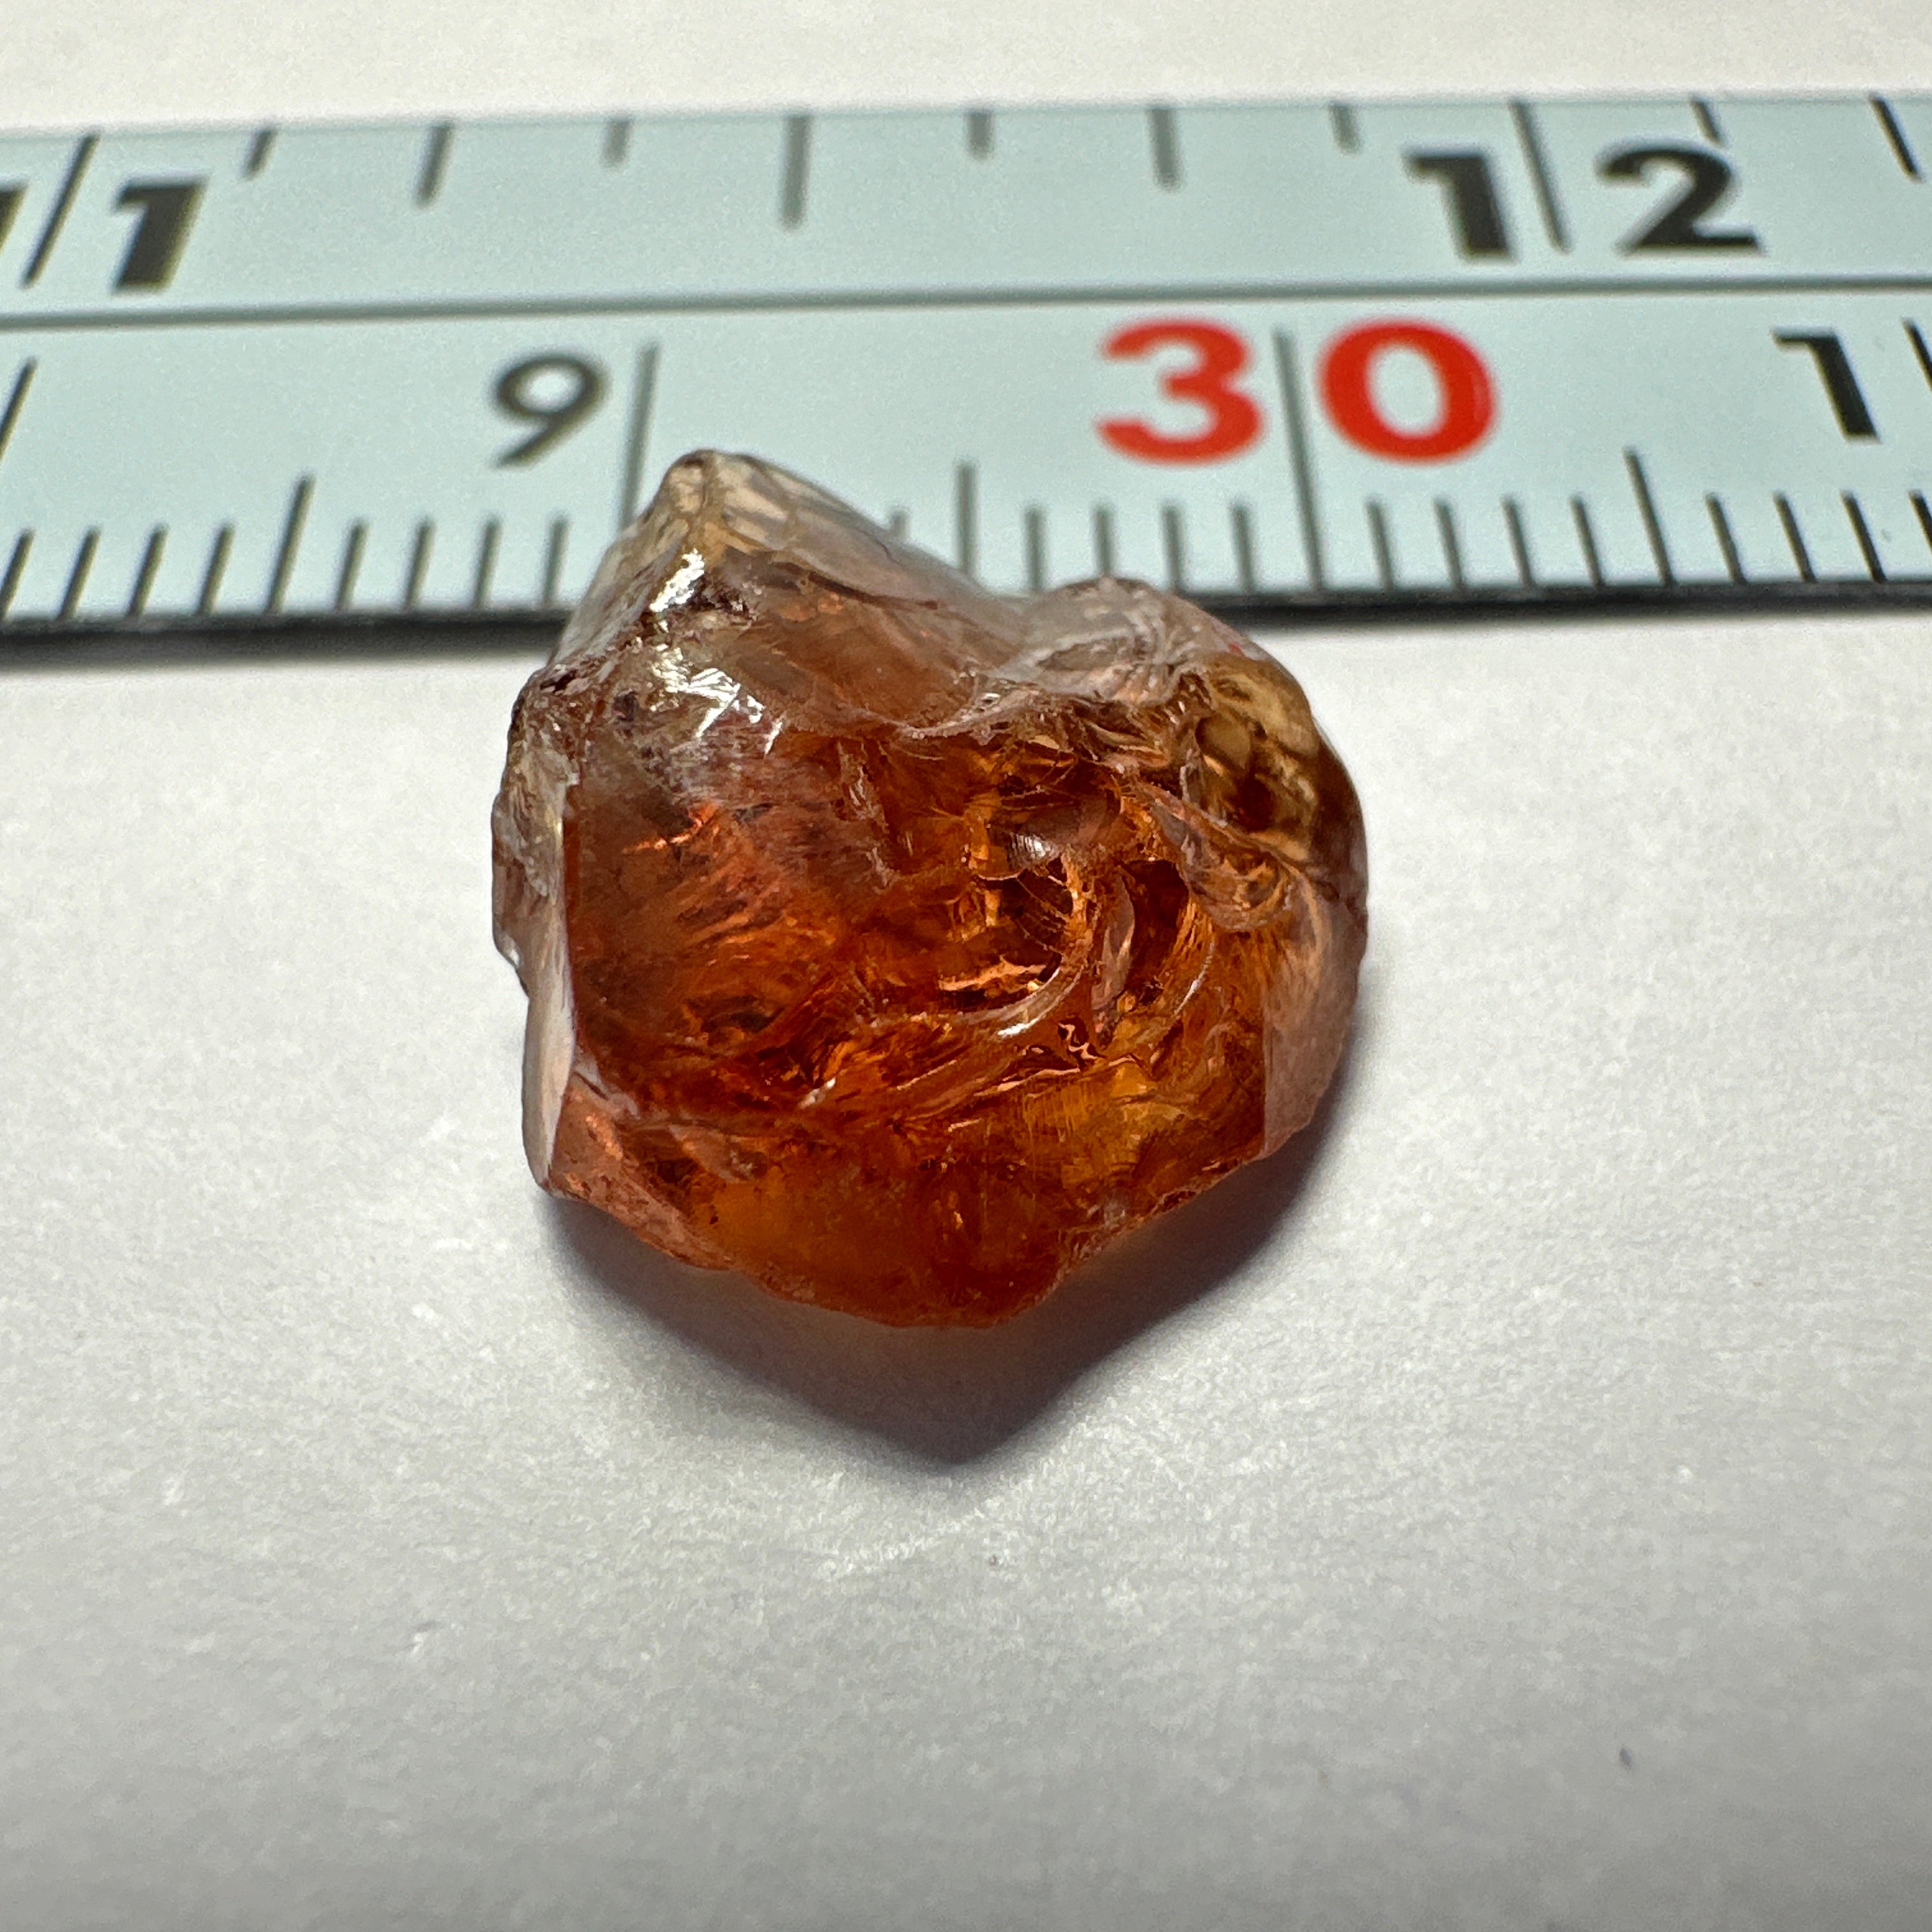 5.95ct Colour Change Garnet, Tanzania, Untreated Unheated, silky with slight inclusions on the outside, flat shape